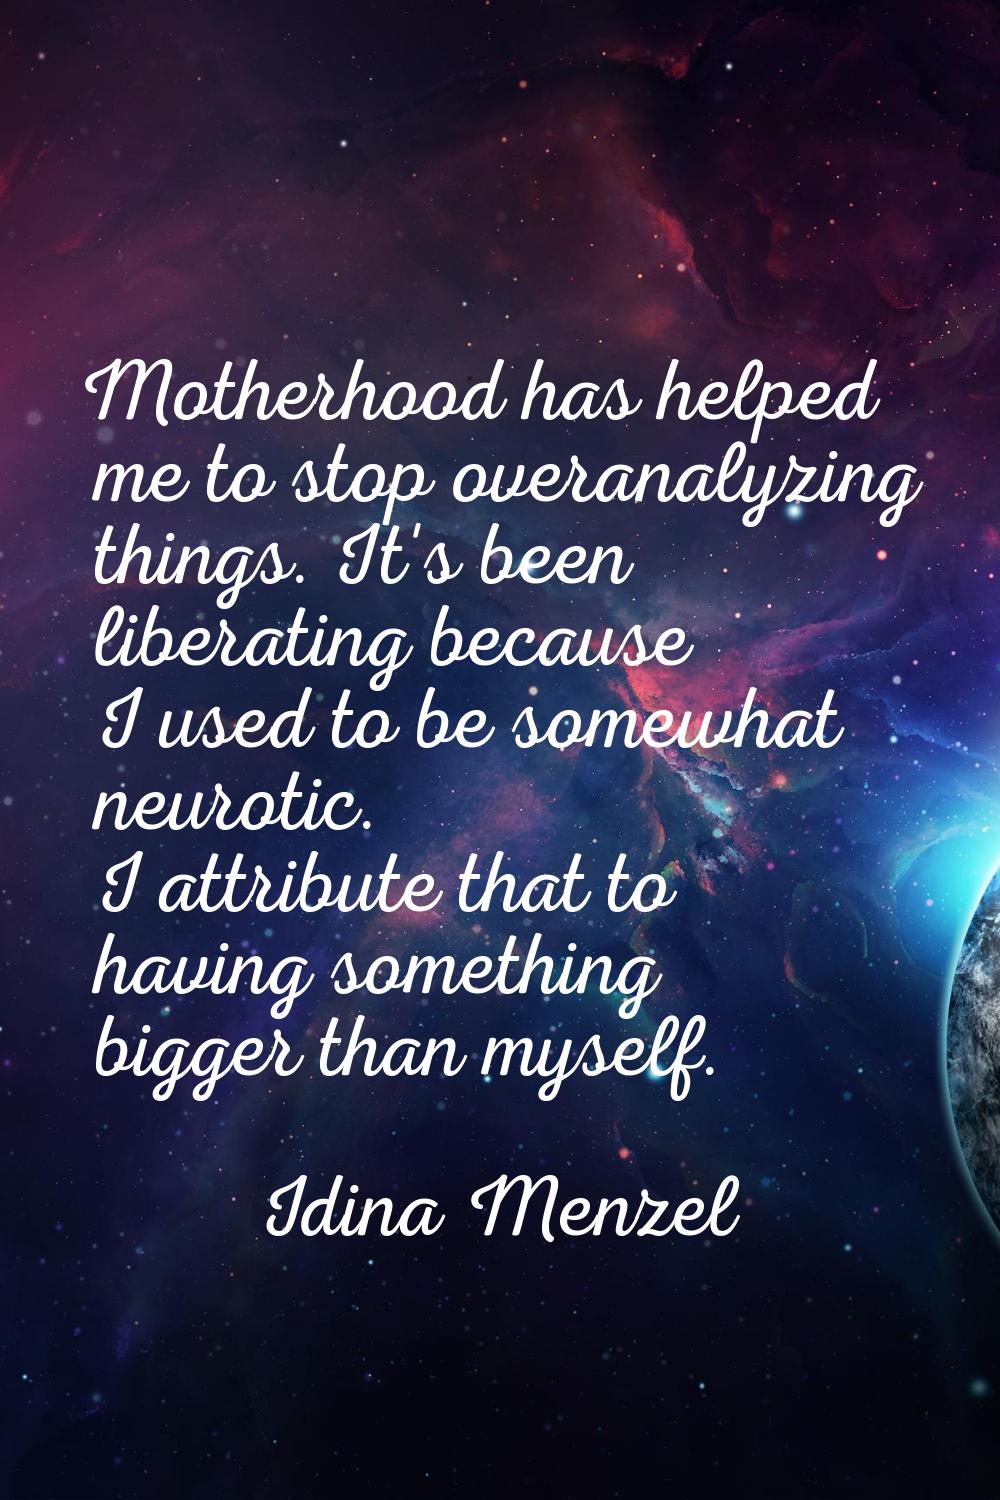 Motherhood has helped me to stop overanalyzing things. It's been liberating because I used to be so